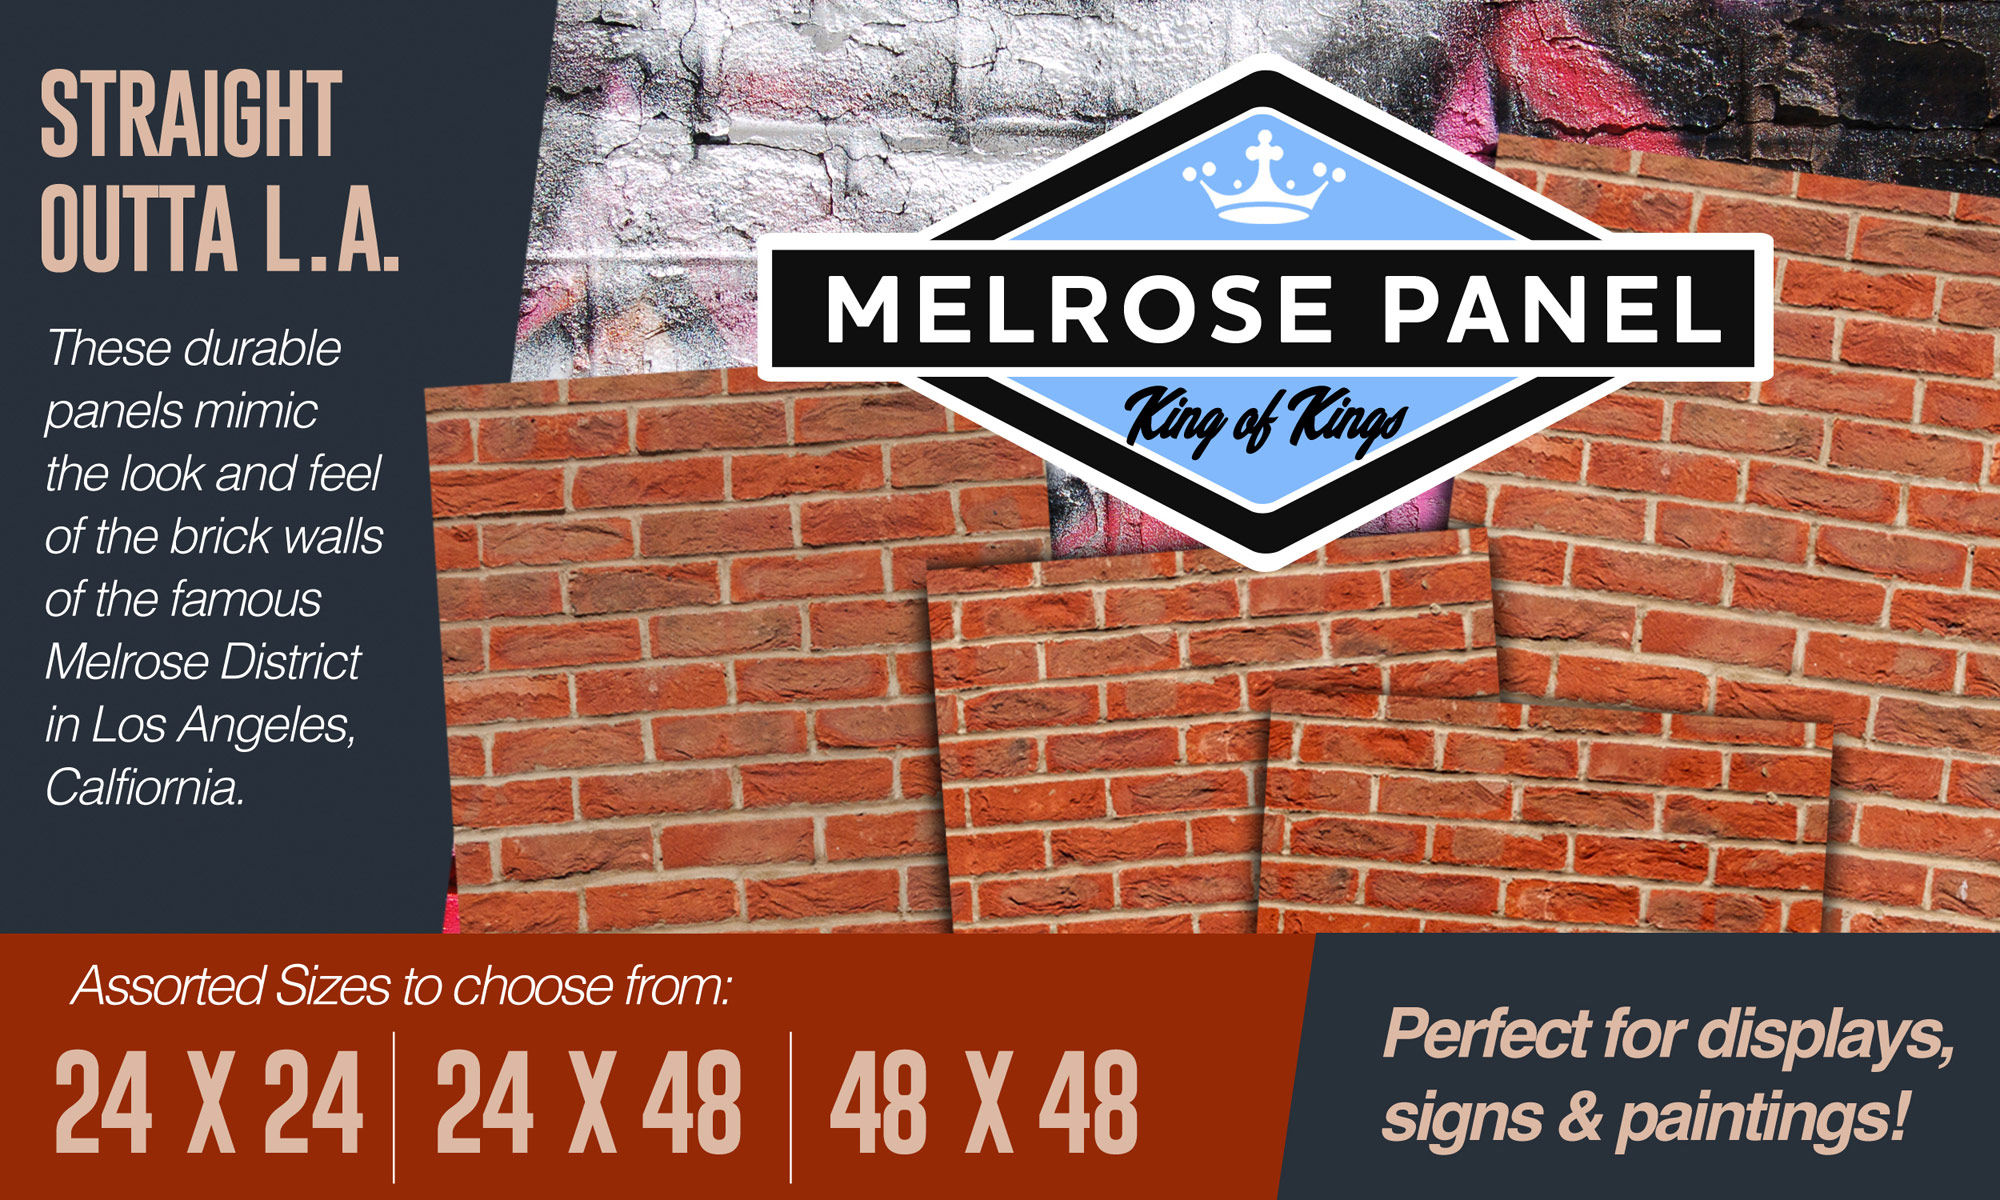 Melrose Panel. King of Kings. Straight Out of L.A. These durable panels mimic the look and feel of the brick walls of the famous Melrose District in Los Angeles, California. Assorted sizes to choose from: 24x24, 24x48, 48x48. Perfect for displays, signs and paintings!